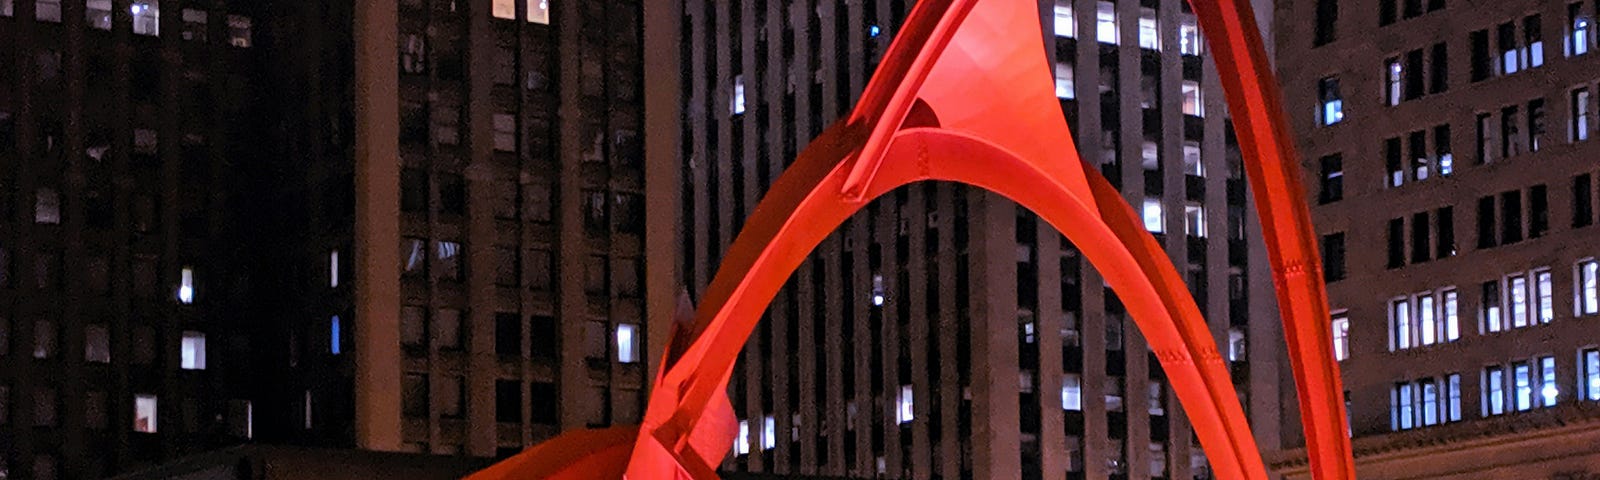 a nighttime photo of the huge bright-red sculpture in front of a tall office building